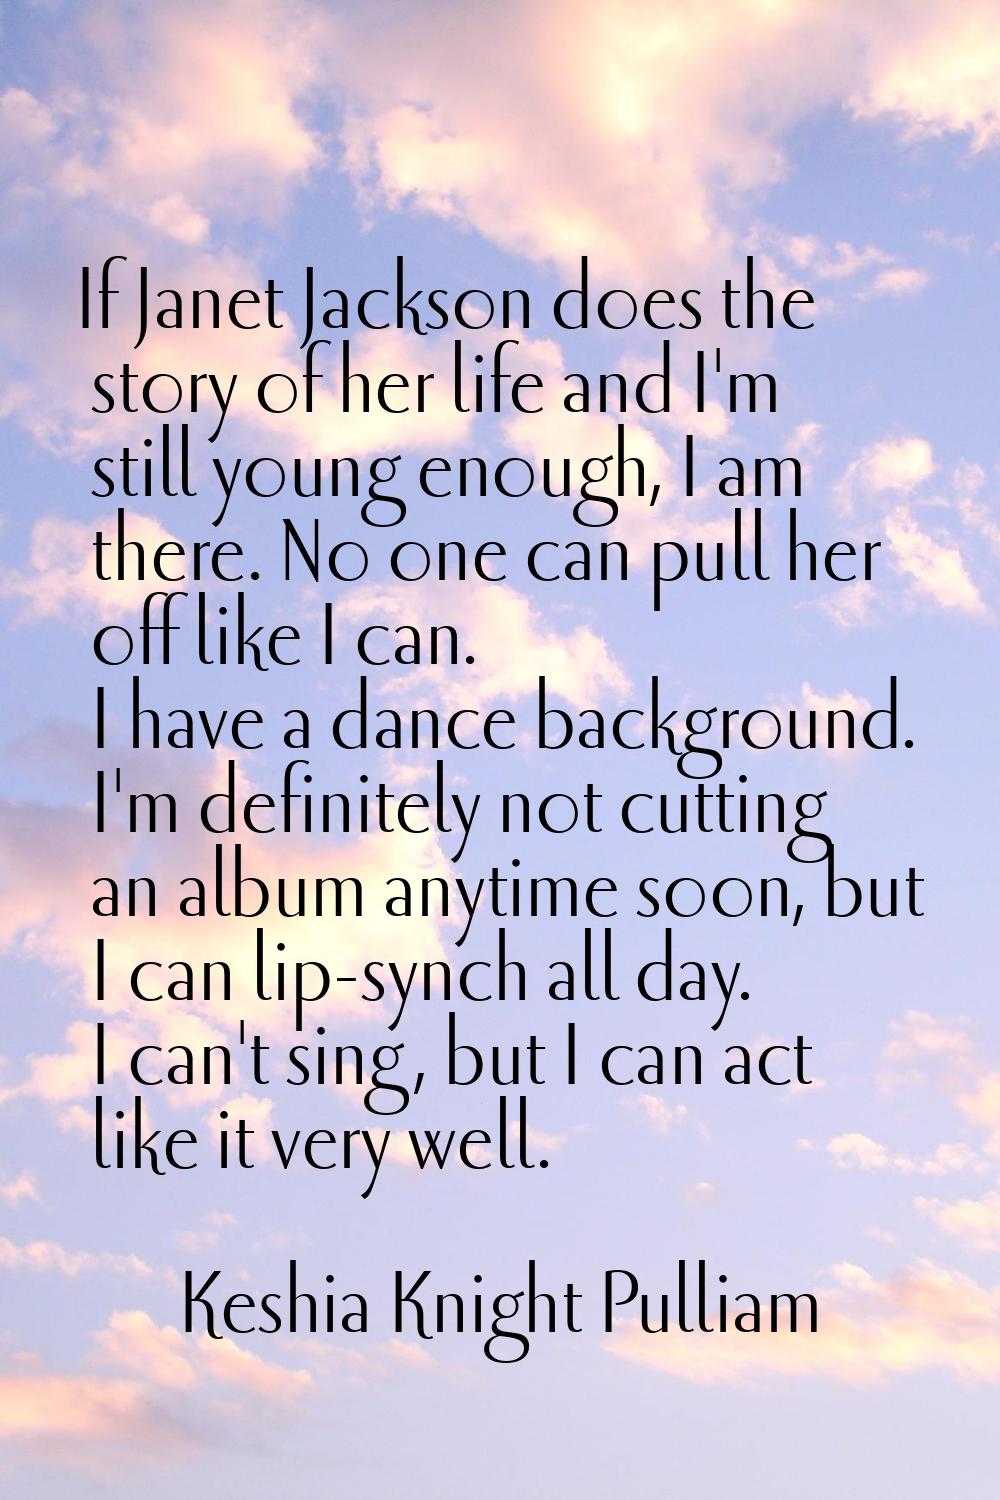 If Janet Jackson does the story of her life and I'm still young enough, I am there. No one can pull